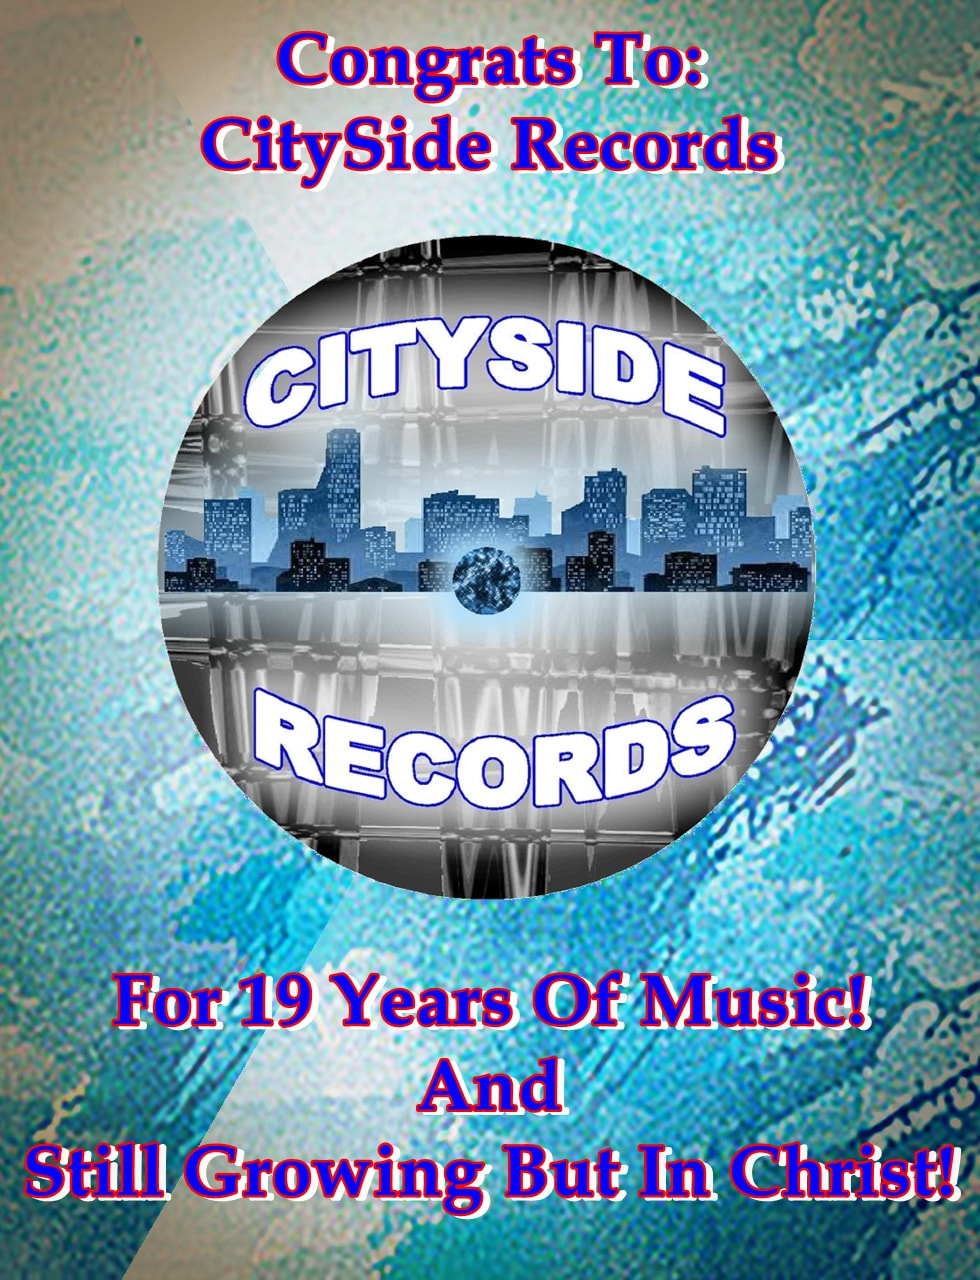 CONGRATS TO CITYSIDE RECORDS FOR 19 YEARS IN THE #MUSIC BUSINESS 